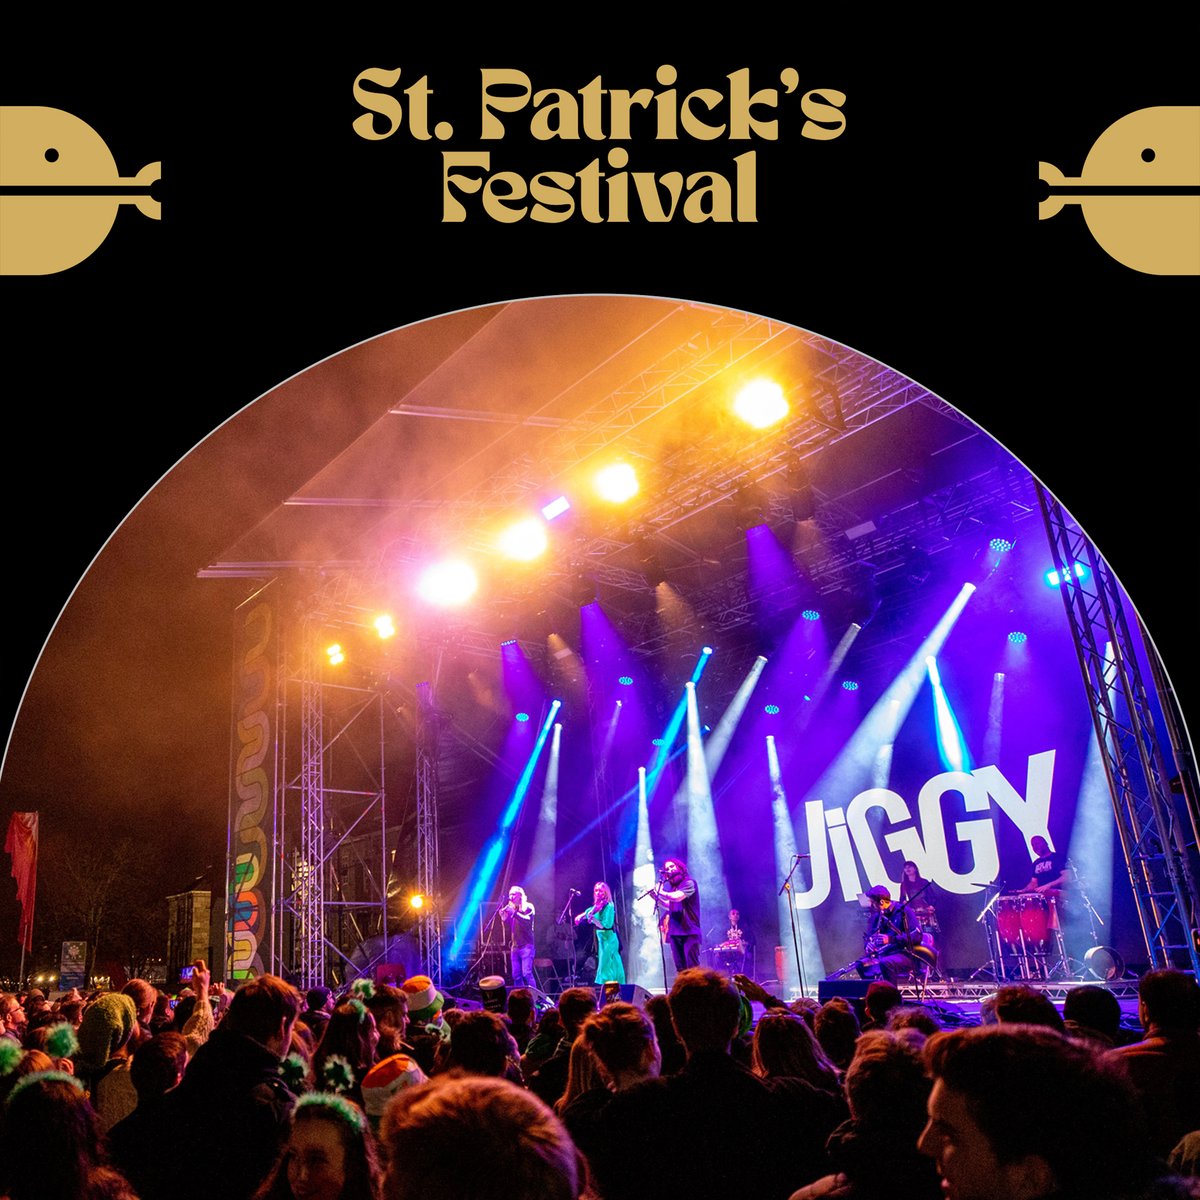 📣 We’re delighted to announce that we will be returning to perform at this year's St. Patrick's Festival! @stpatricksfest 💚

📍National Museum of Ireland, Collins Barracks
📅Friday March 17th

#SPF23 #StPatricksFestival @NMIreland